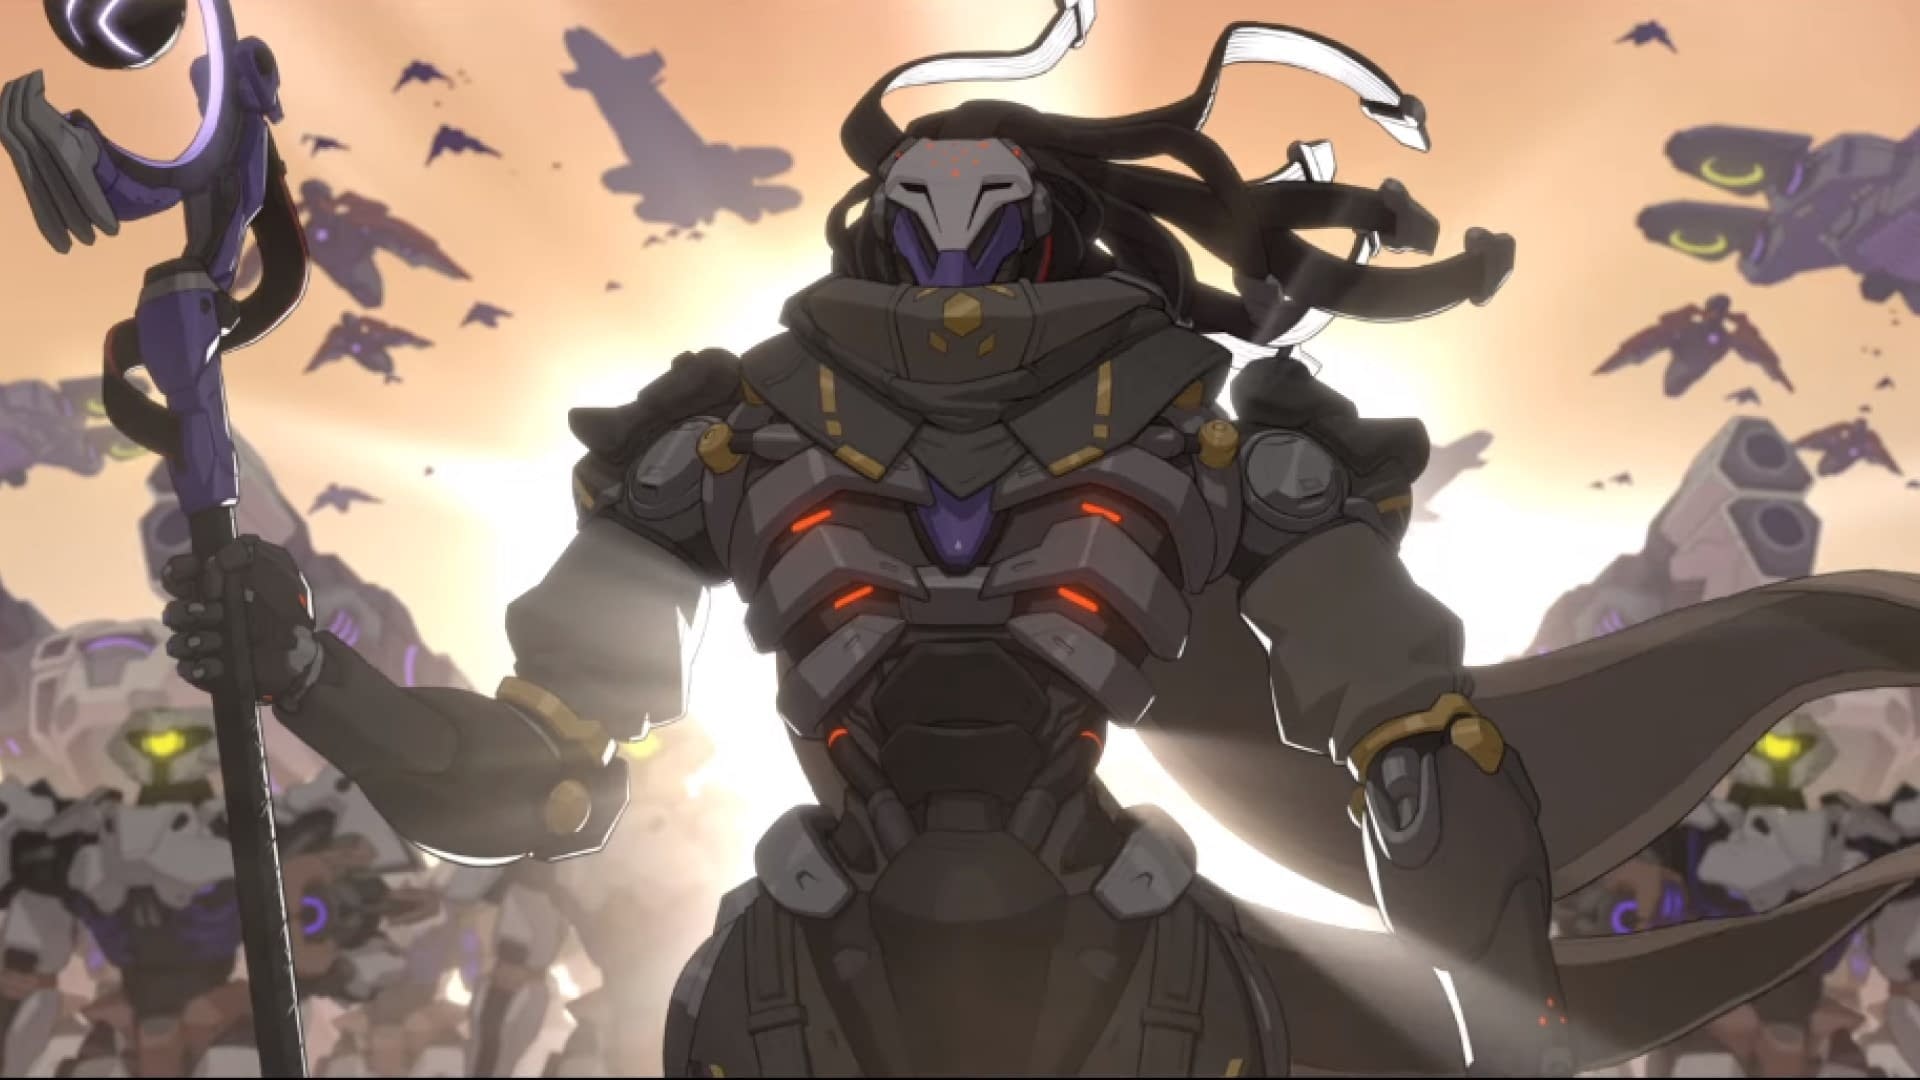 New Character Coming to Overwatch 2 in December: Ramattra